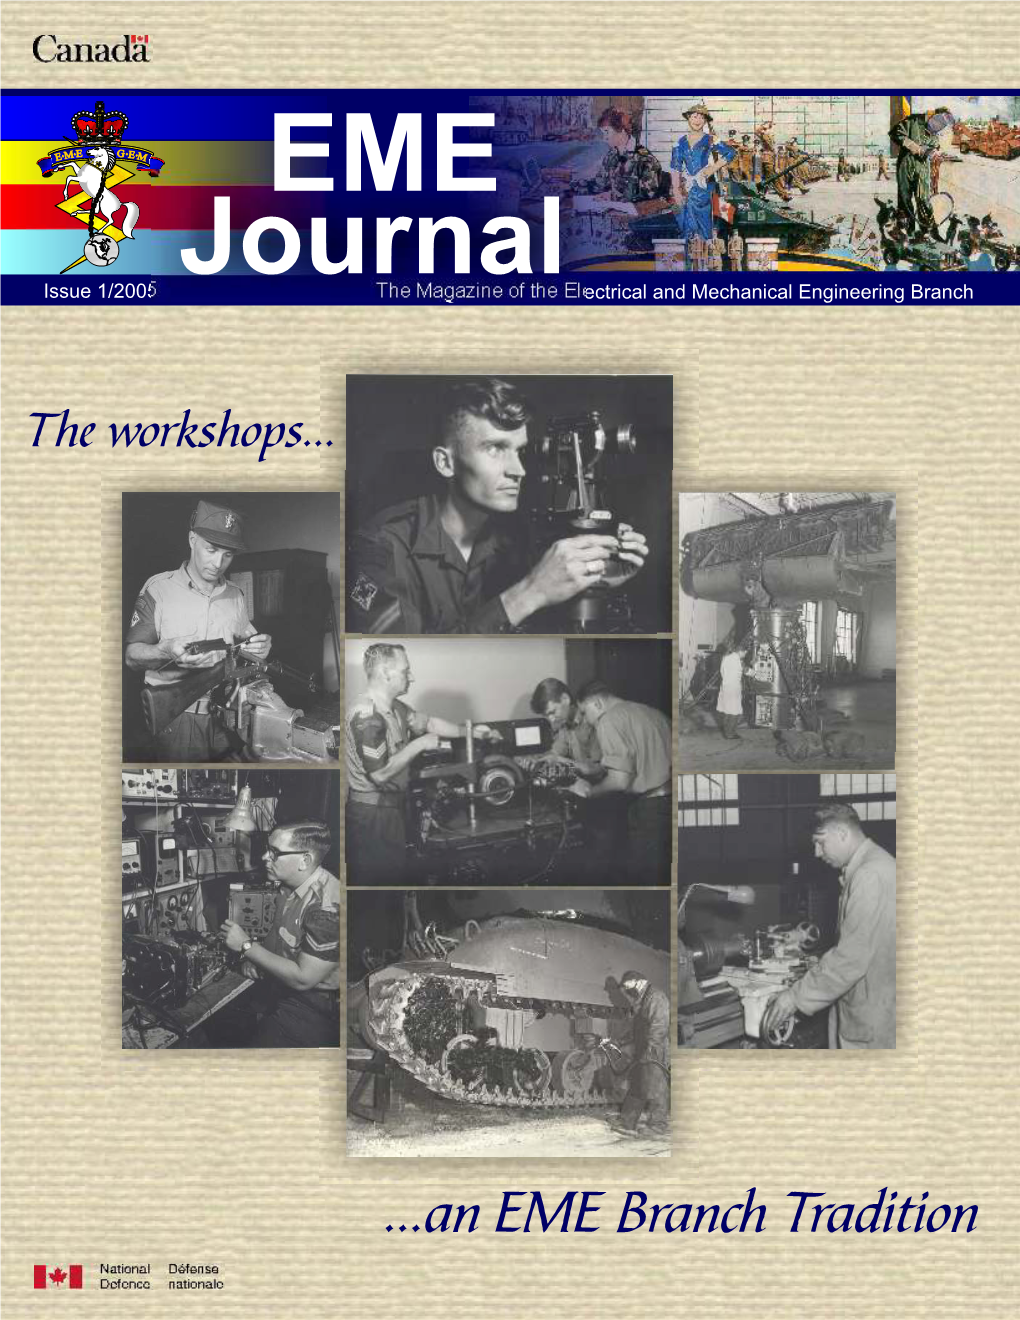 Journal Issue 1/2005 the Magazine of the Electrical and Mechanical Engineering Branch